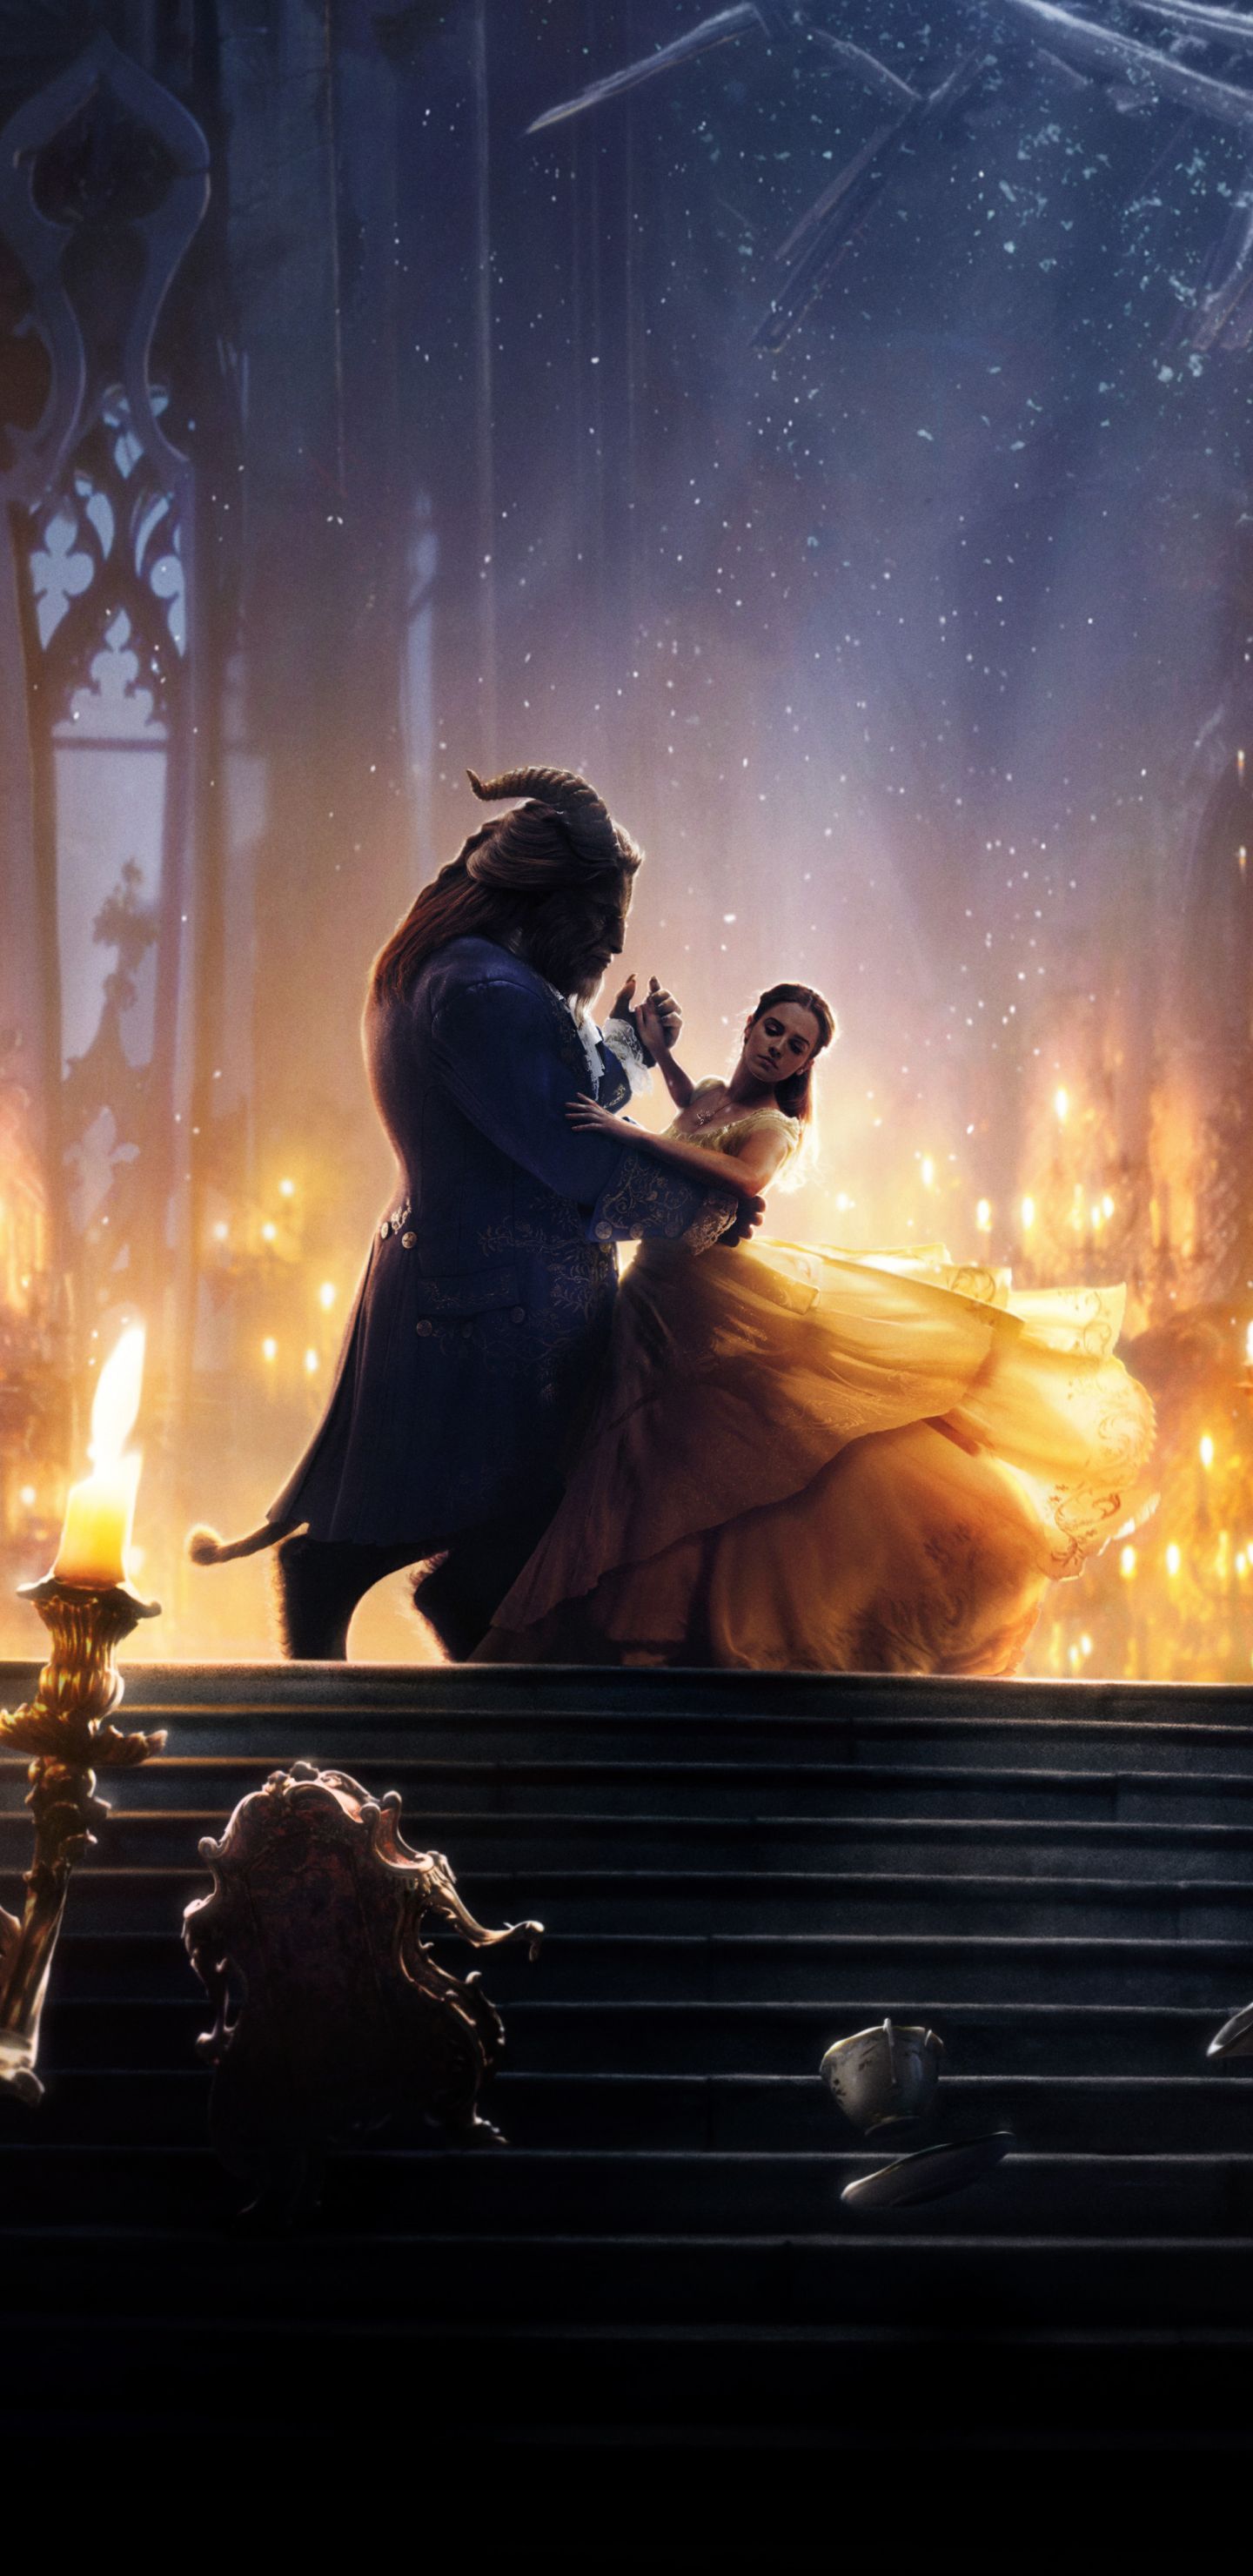 beauty and the beast 2017 full movie online free goto